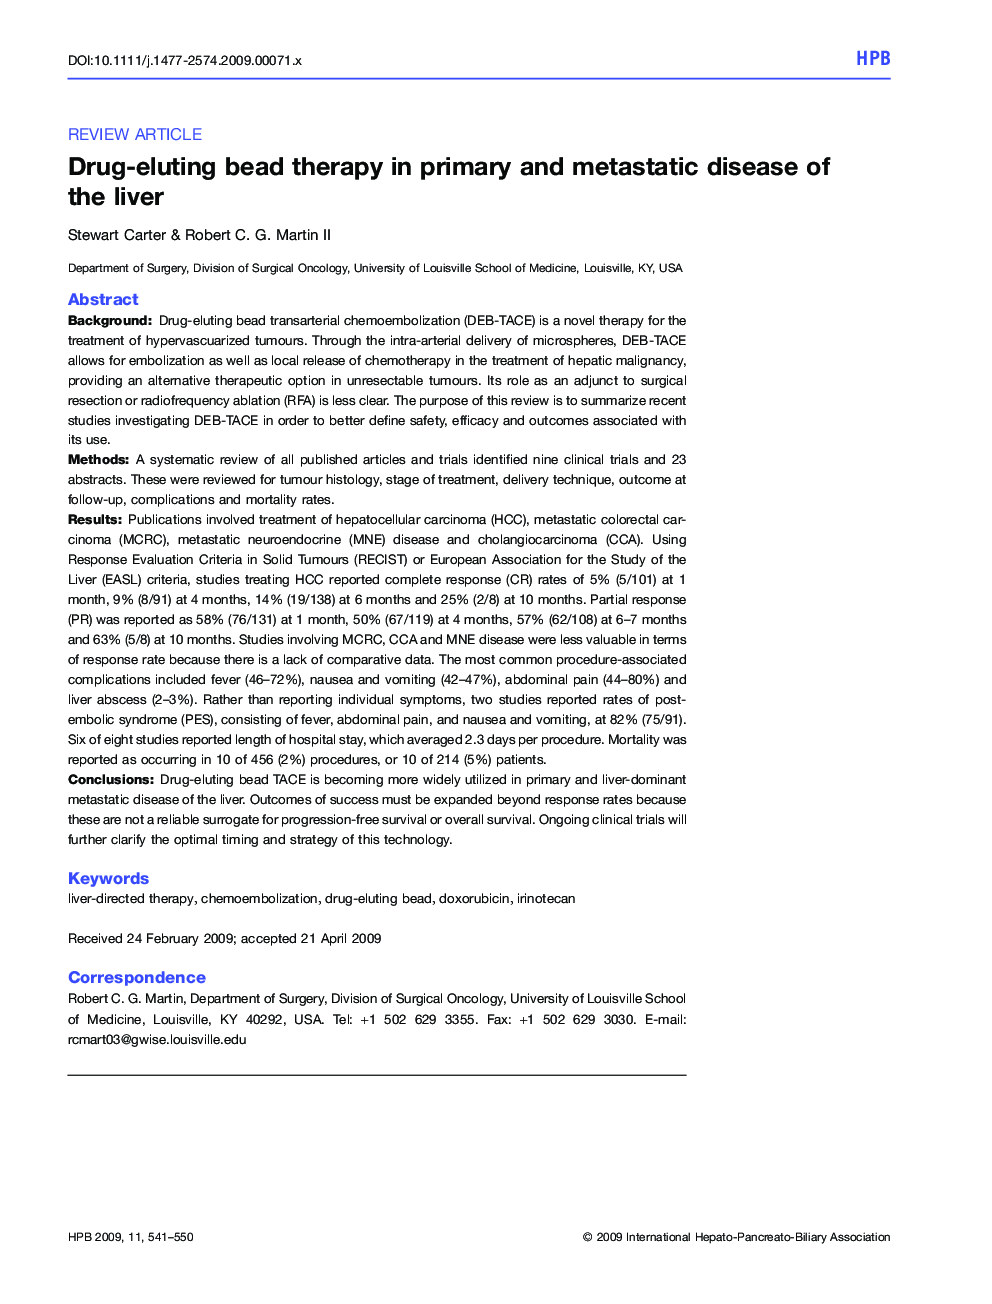 Drug-eluting bead therapy in primary and metastatic disease of the liver